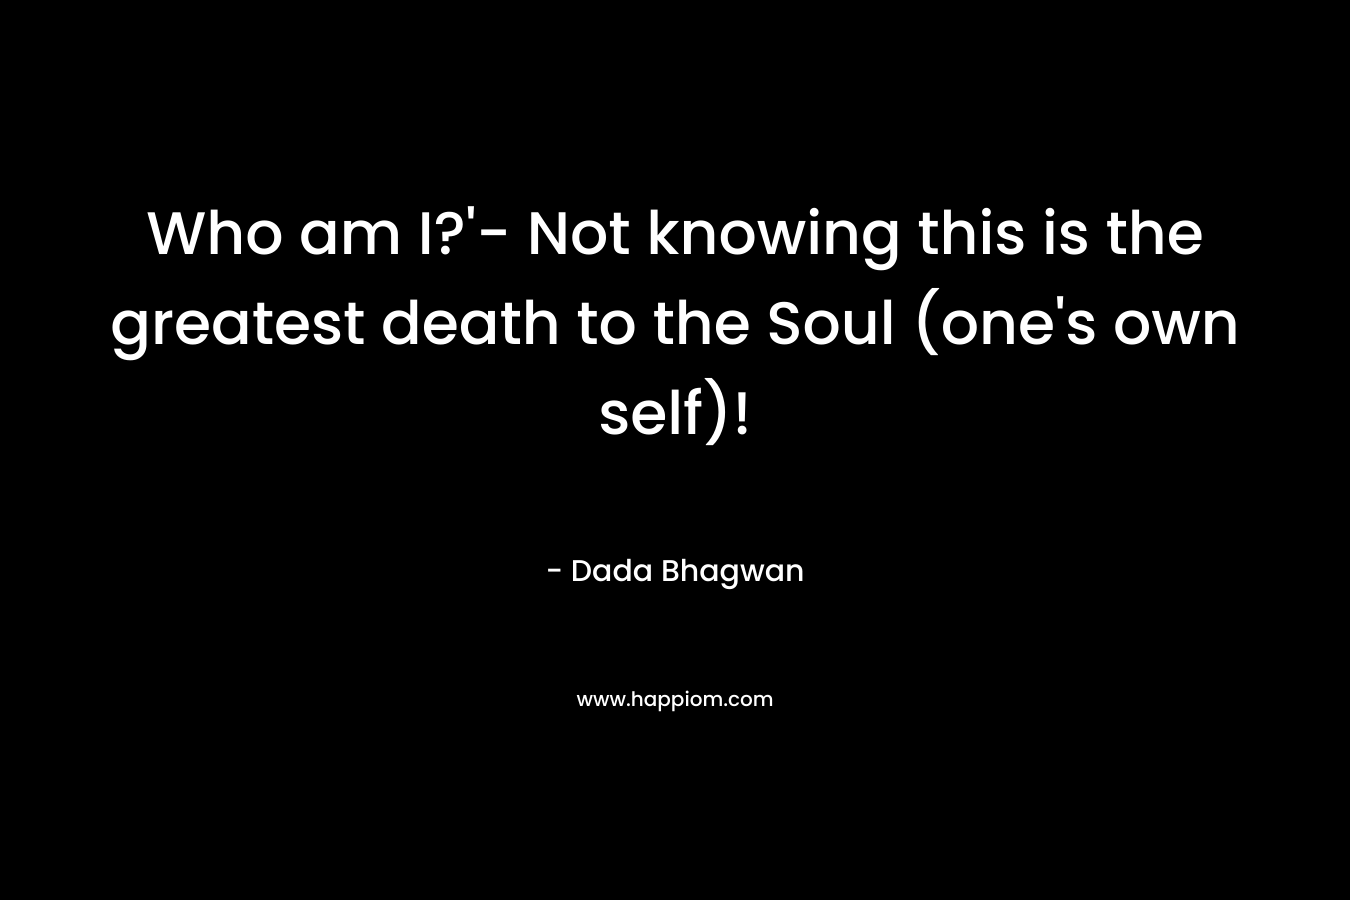 Who am I?'- Not knowing this is the greatest death to the Soul (one's own self)!